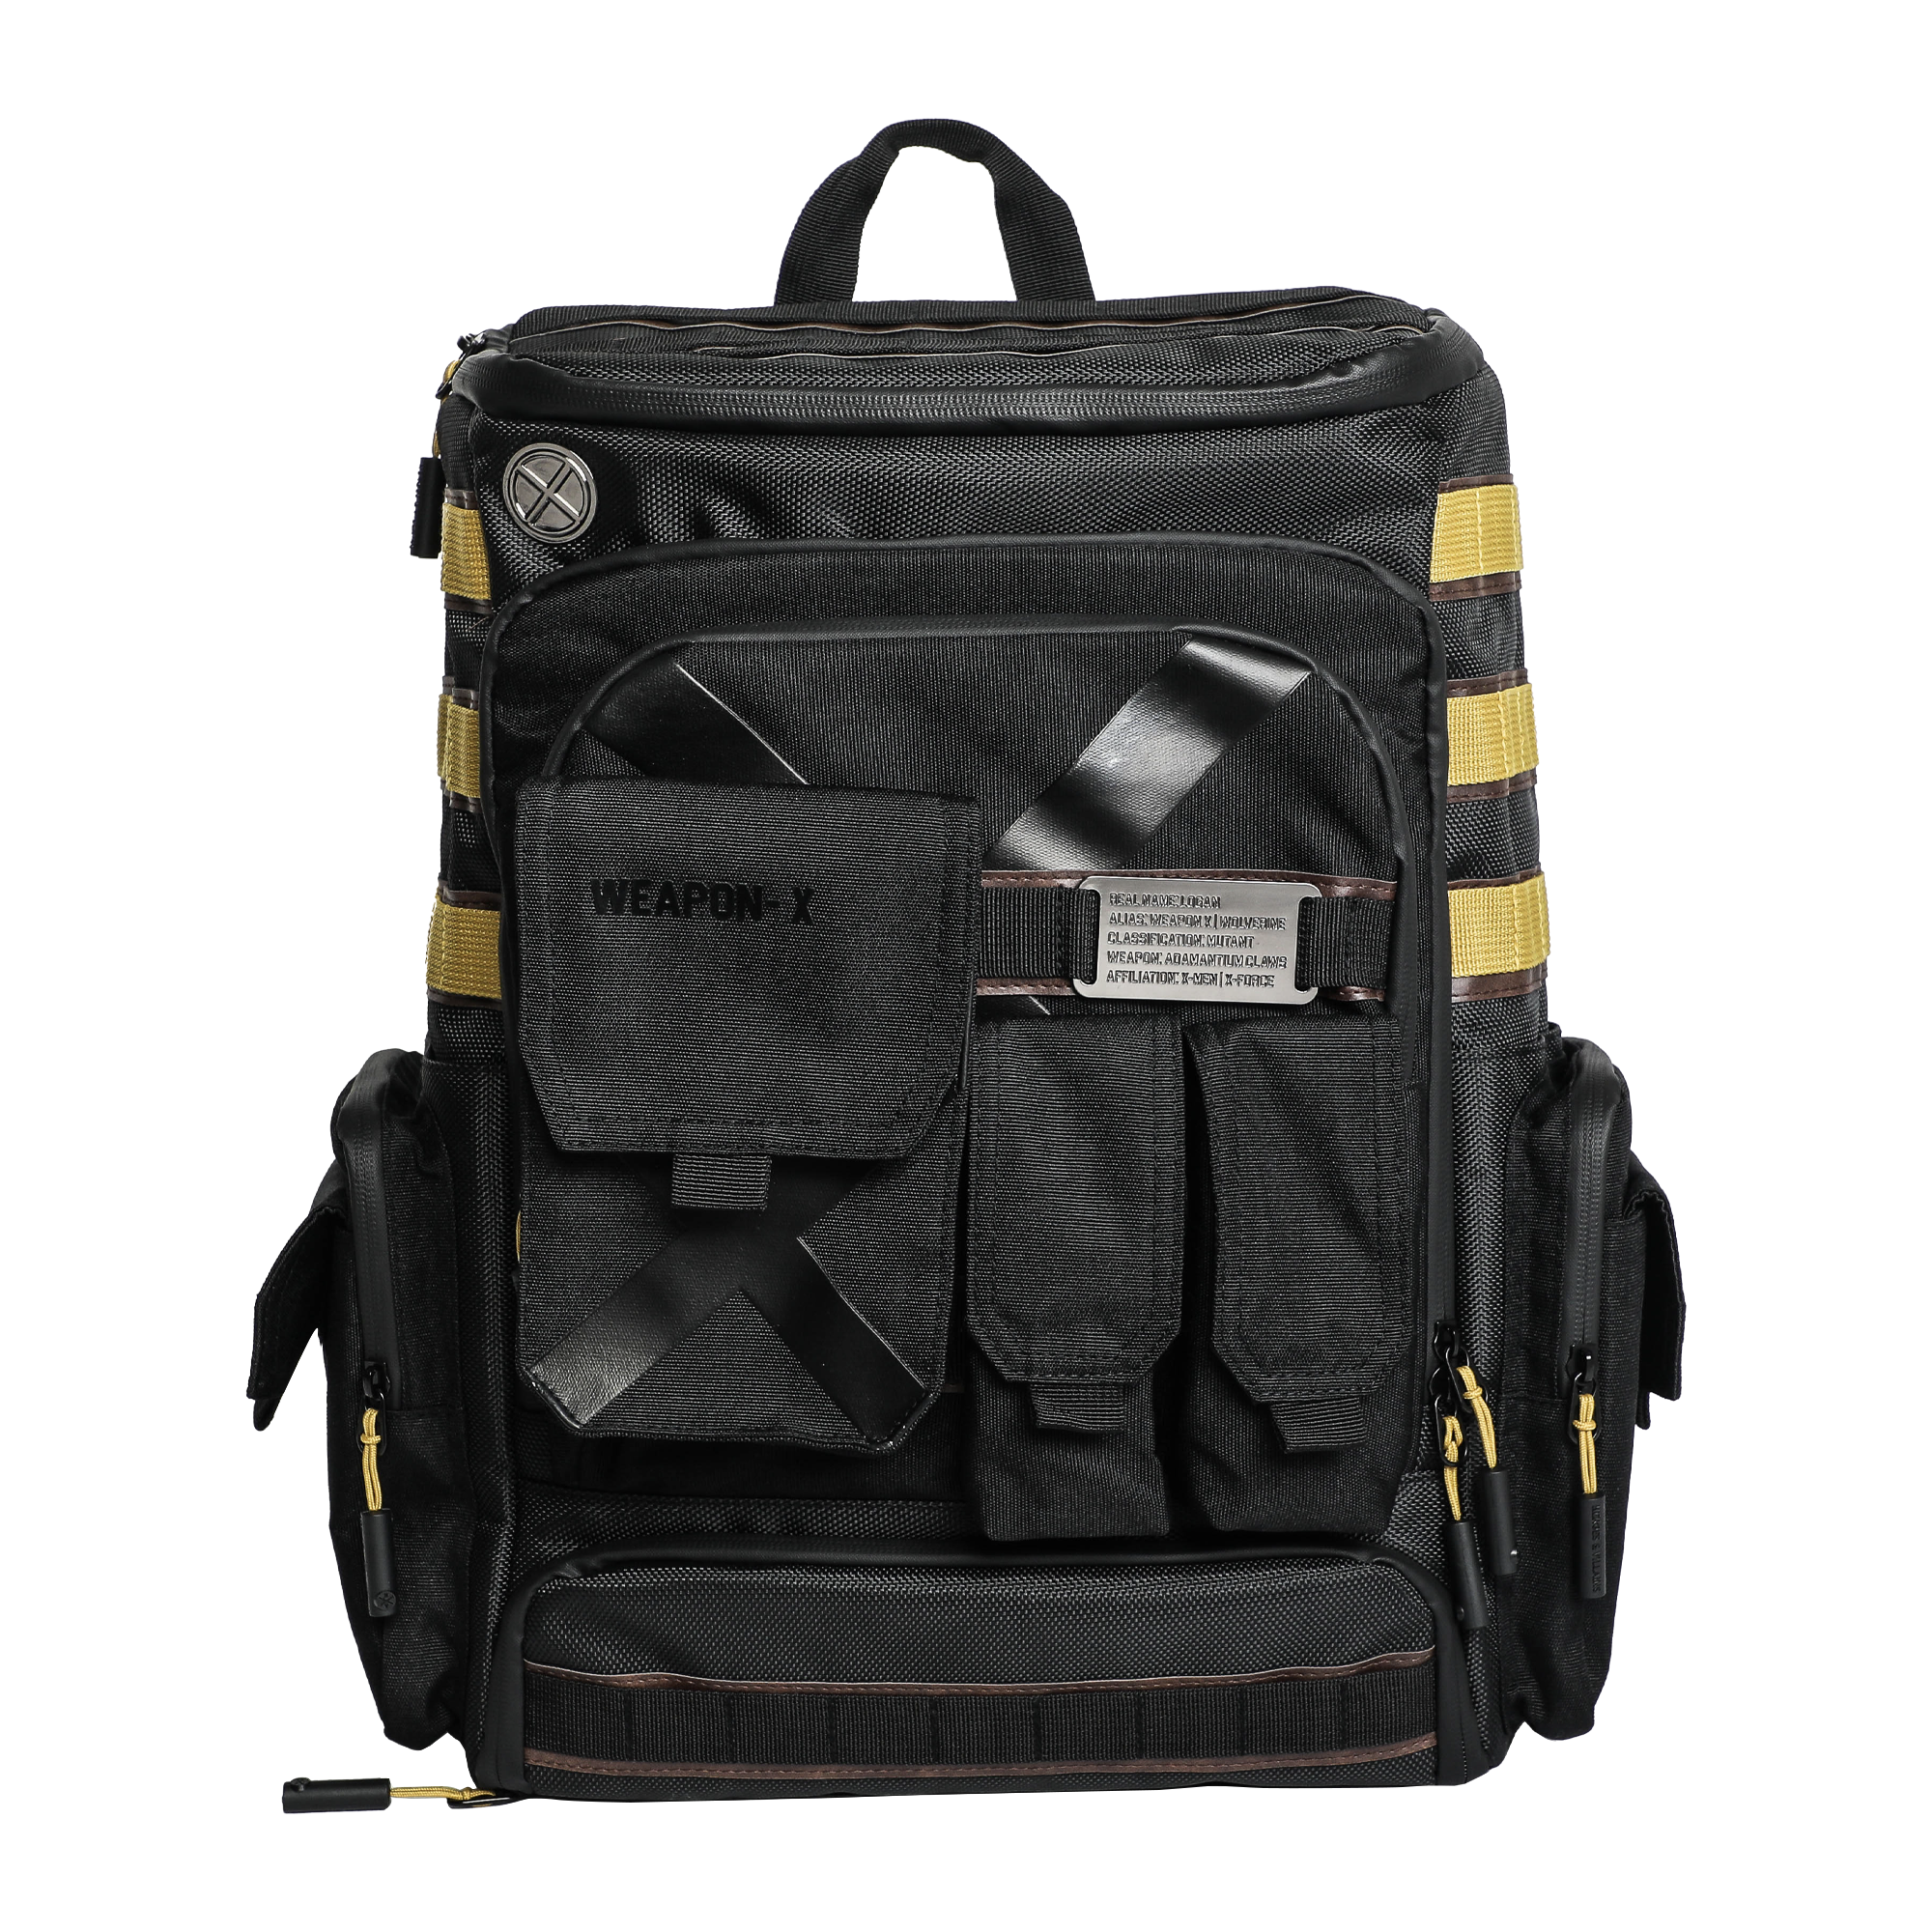 Weapon X Backpack